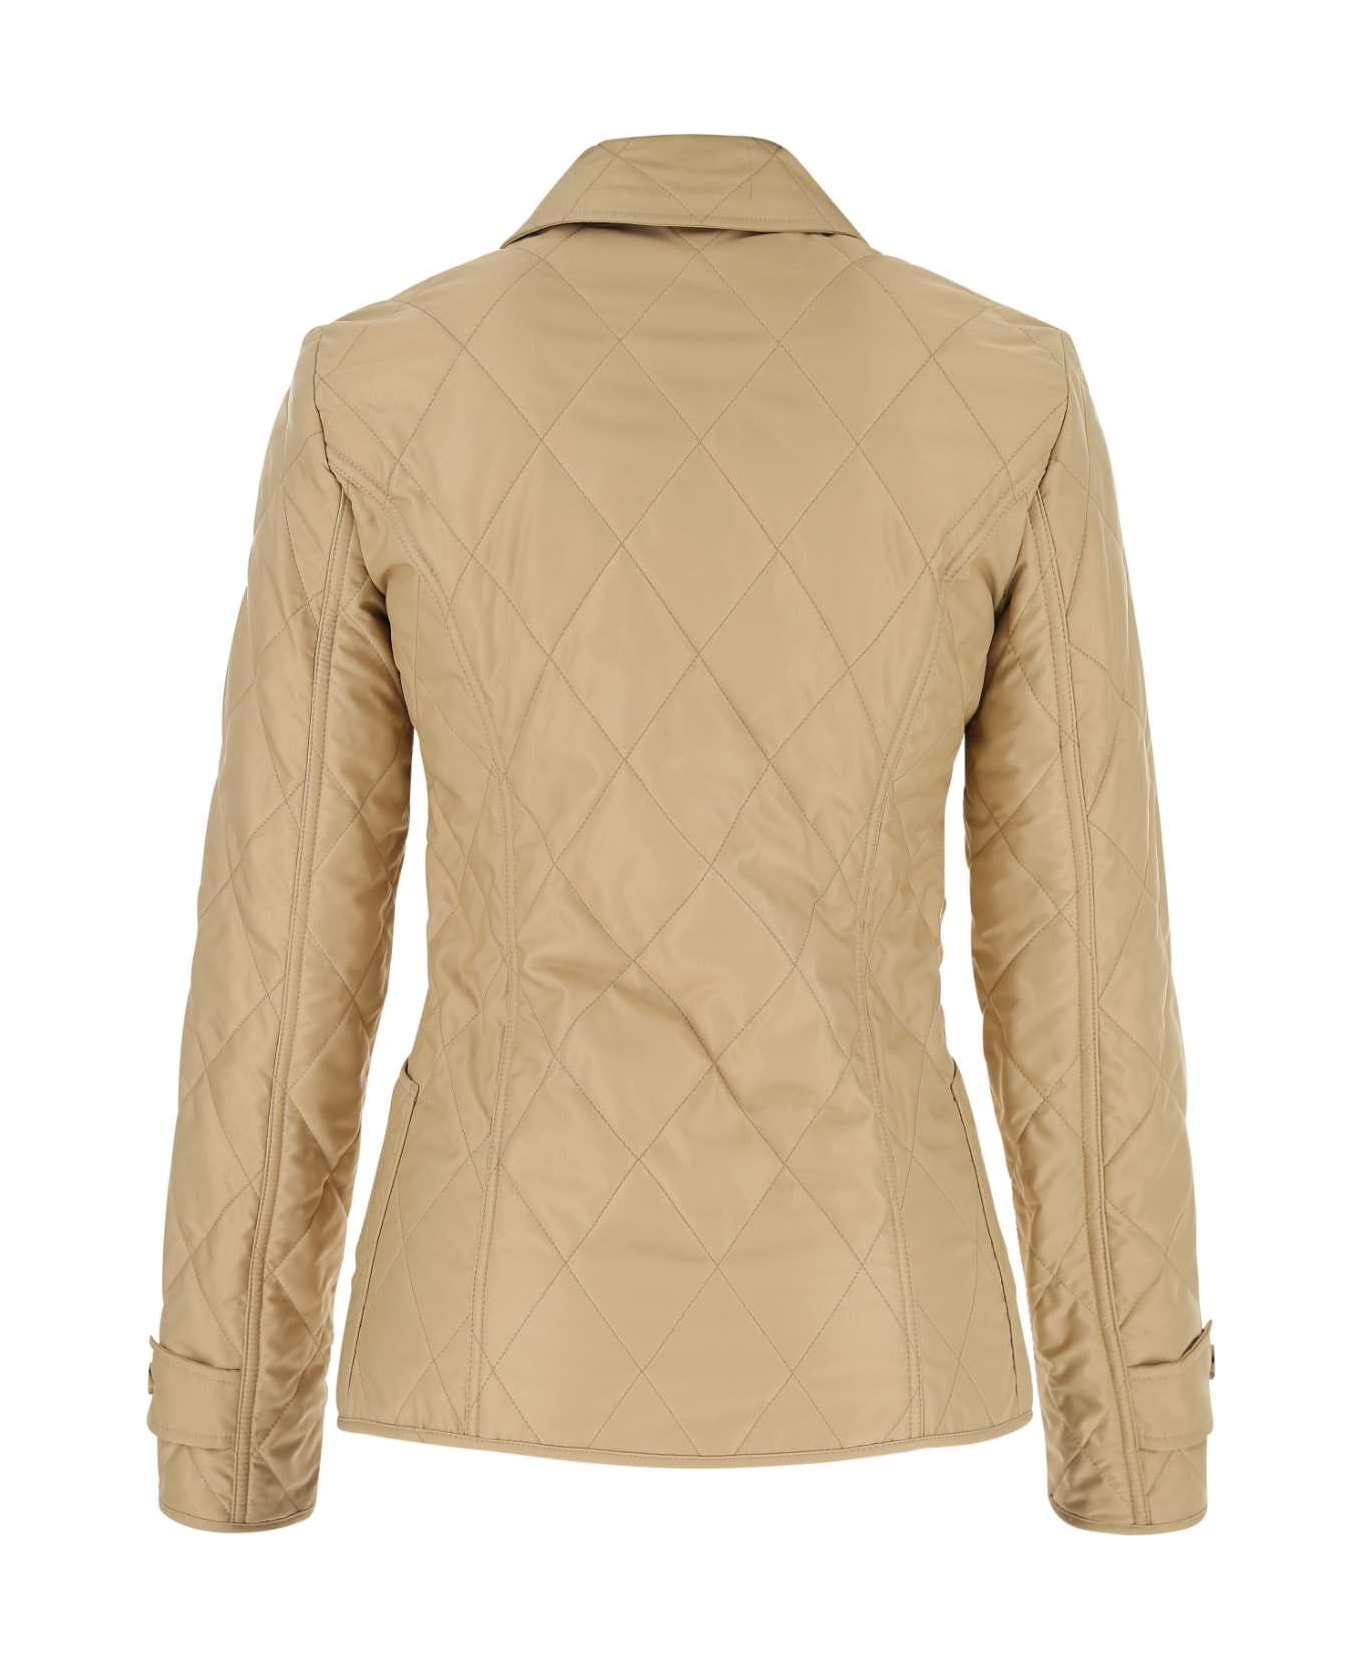 Burberry Beige Polyester Jacket - A4170